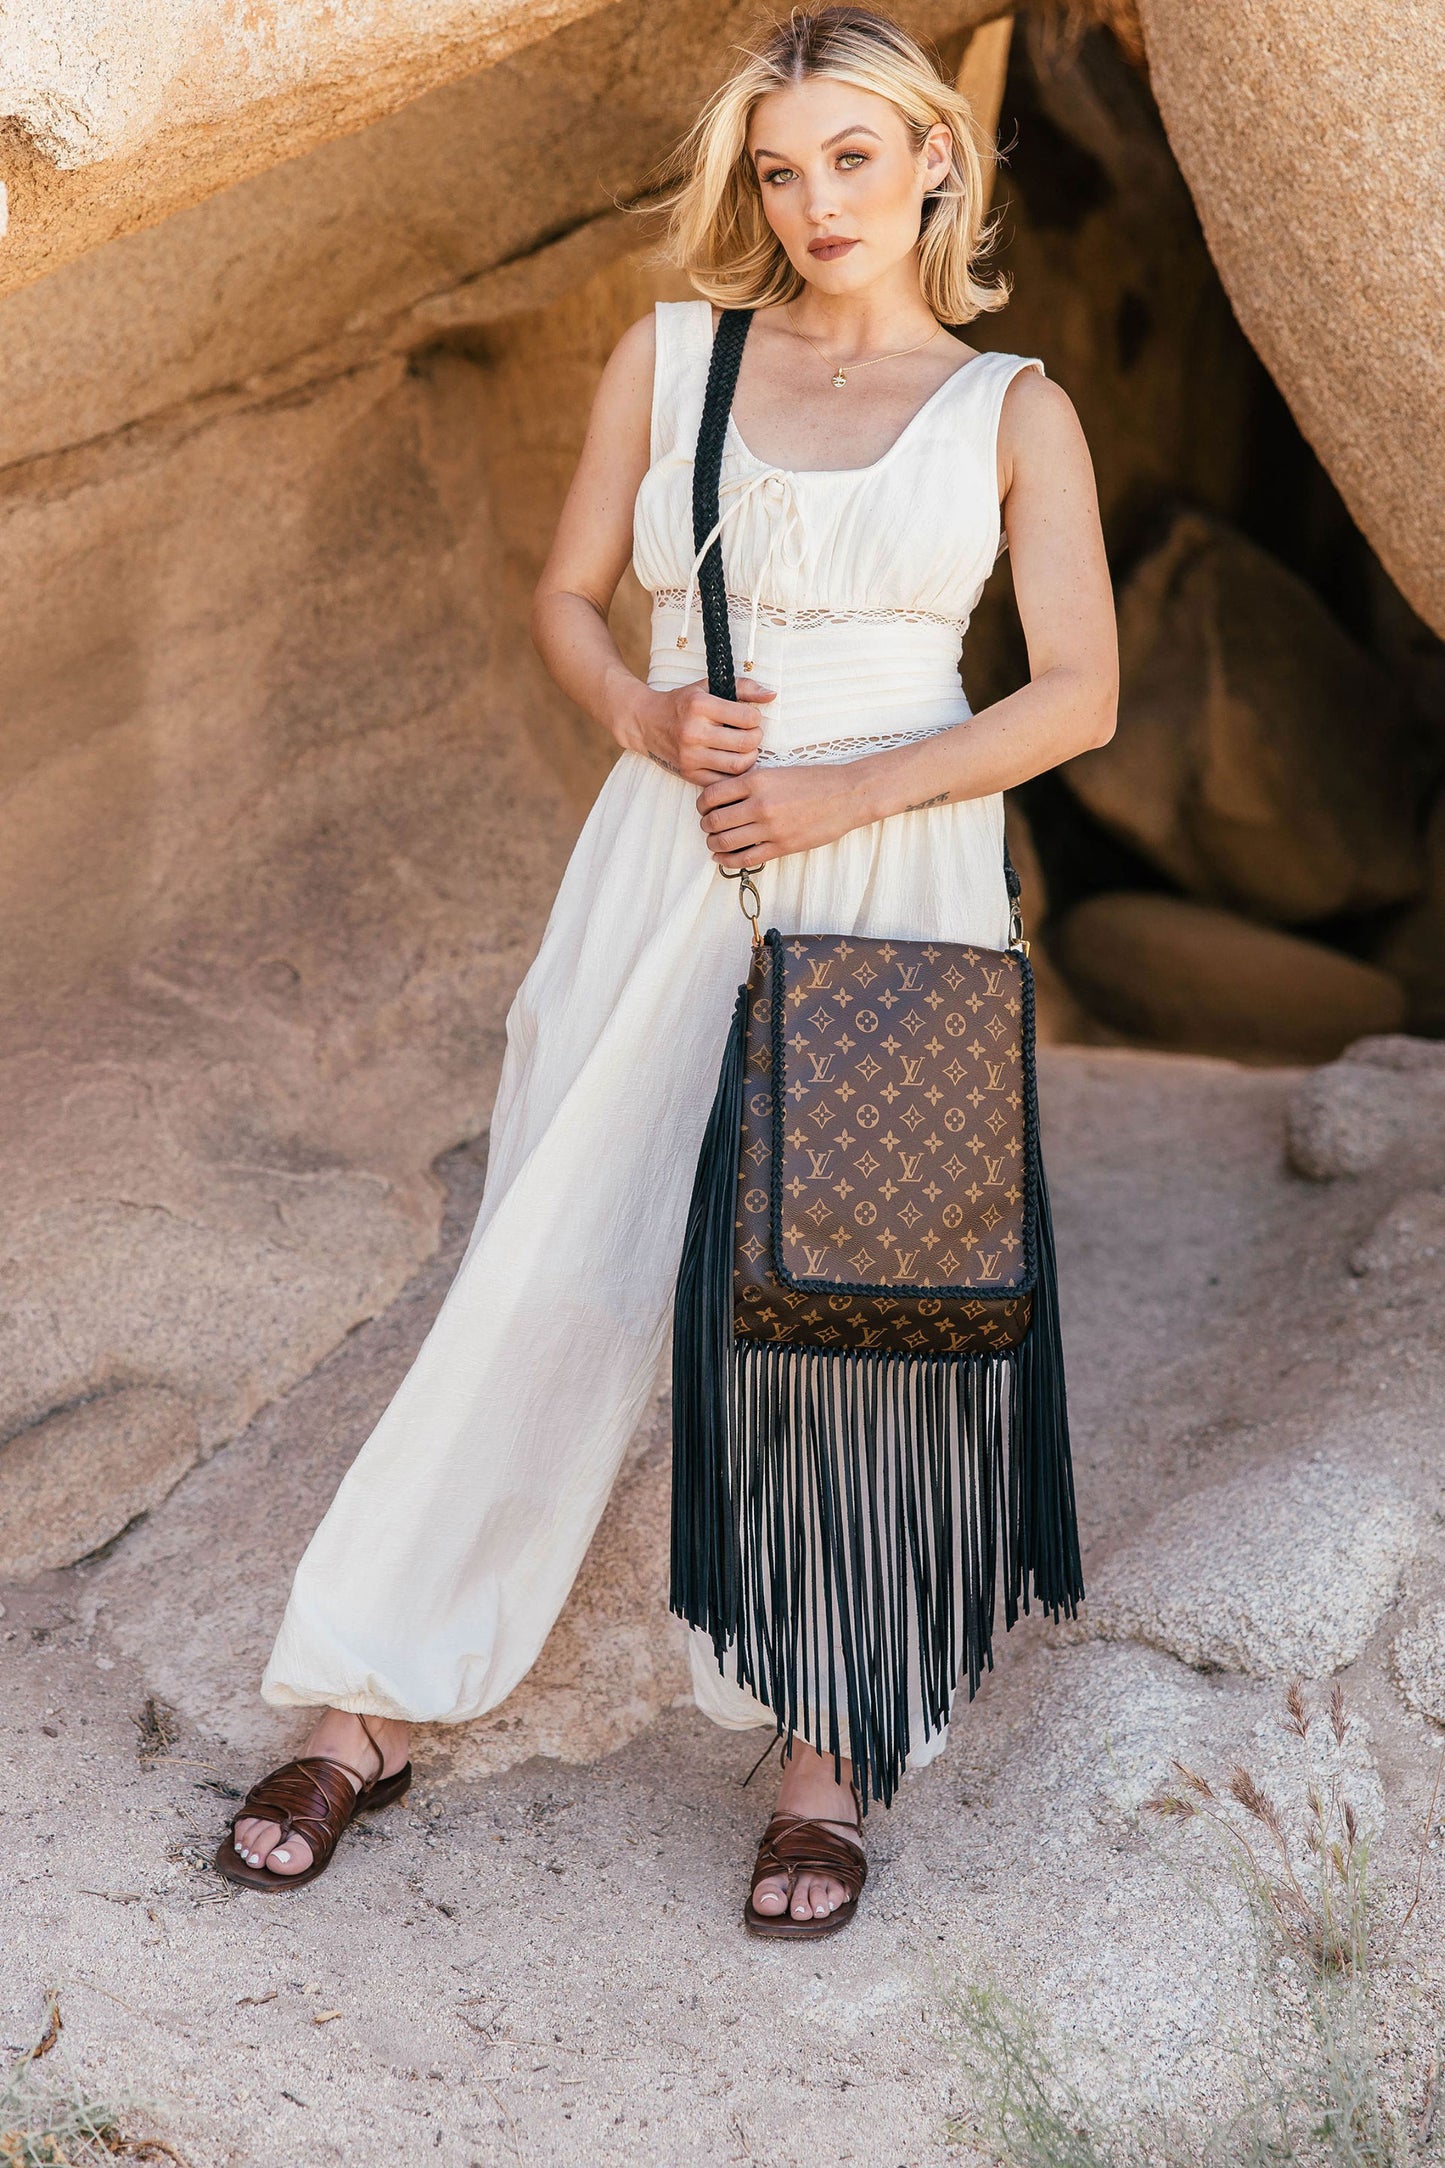 Louis Vuitton, Bags, Fringe Louis Vuitton Crossbody With Turquoise